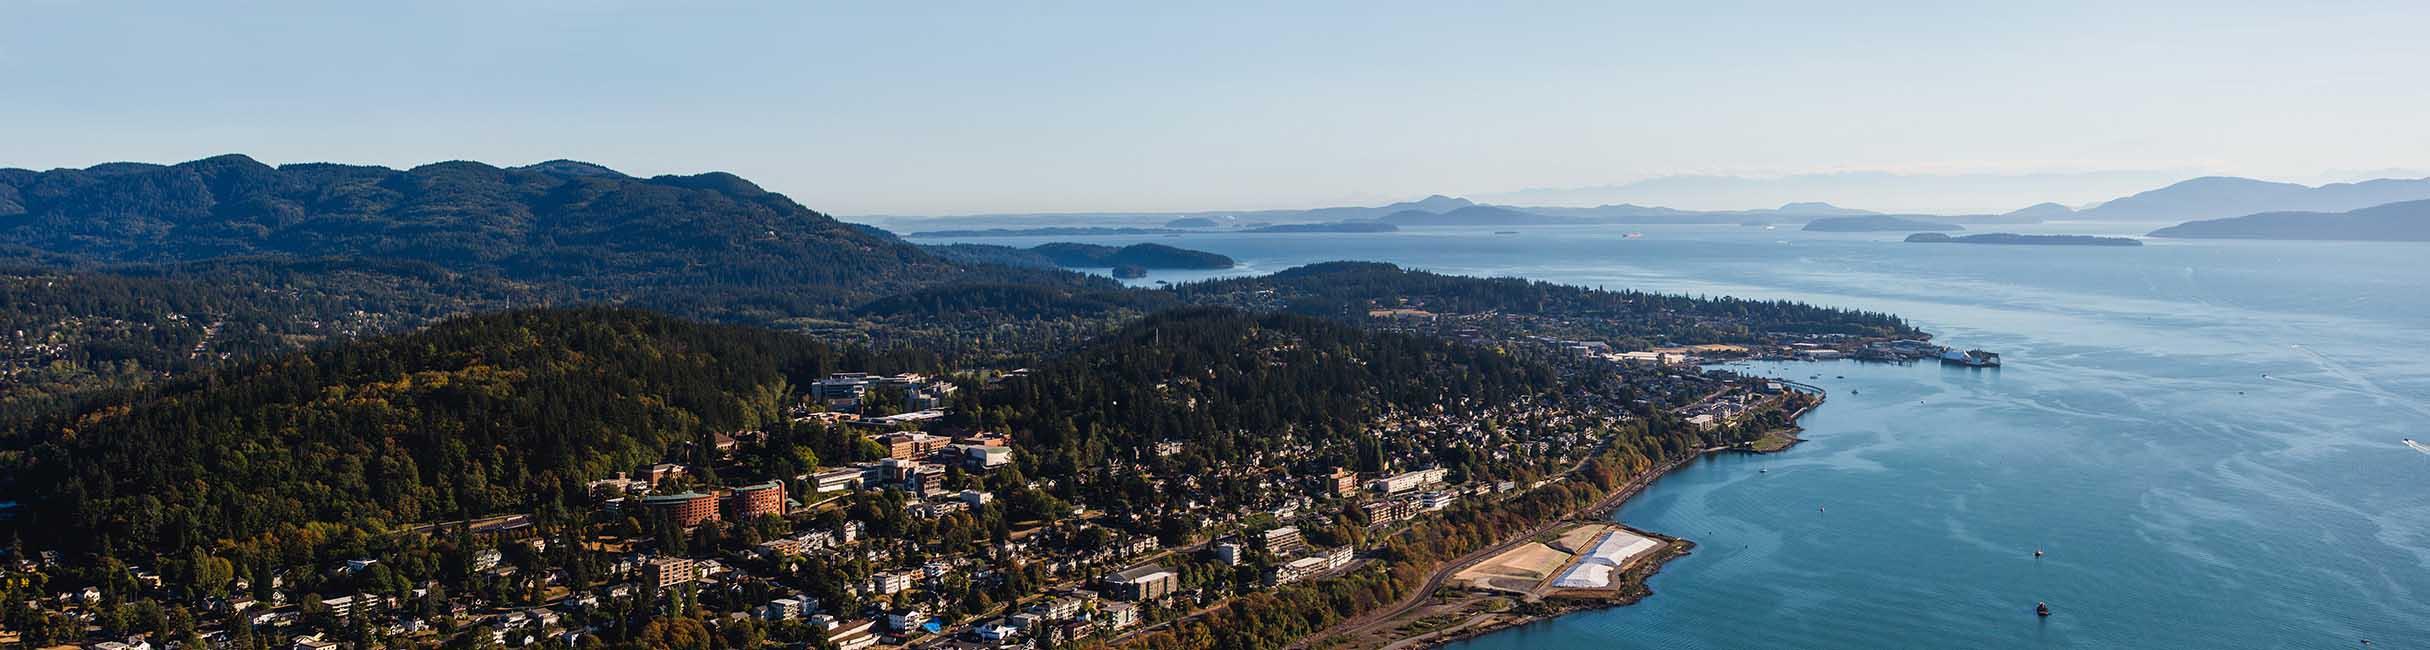 Aerial view of south Bellingham, the bay, islands, hills and mountains near Western Washington University campus